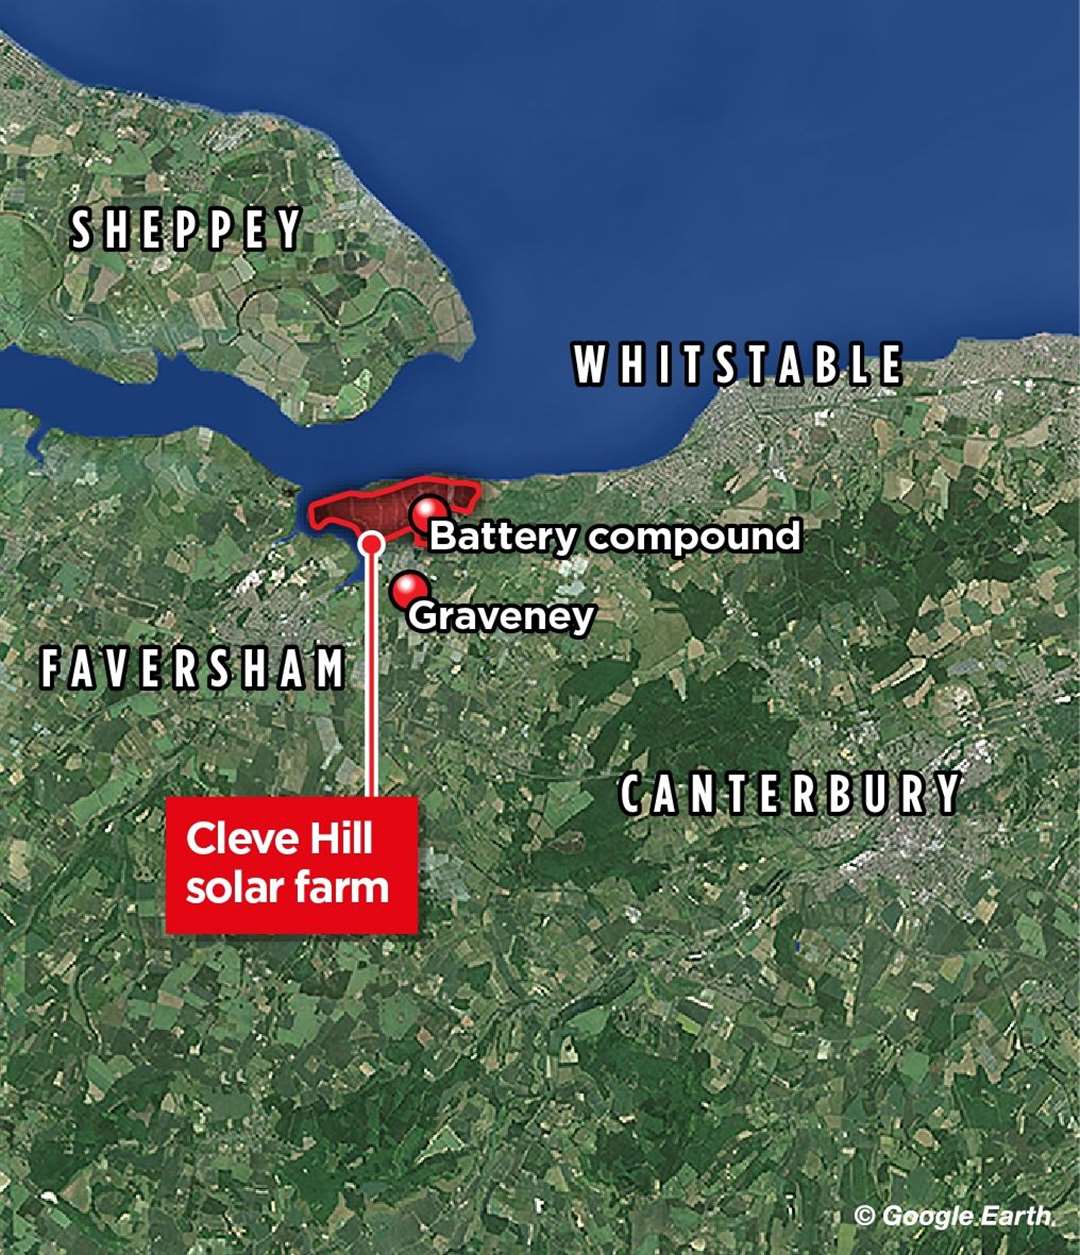 Where the solar farm is being built, between Faversham and Whitstable